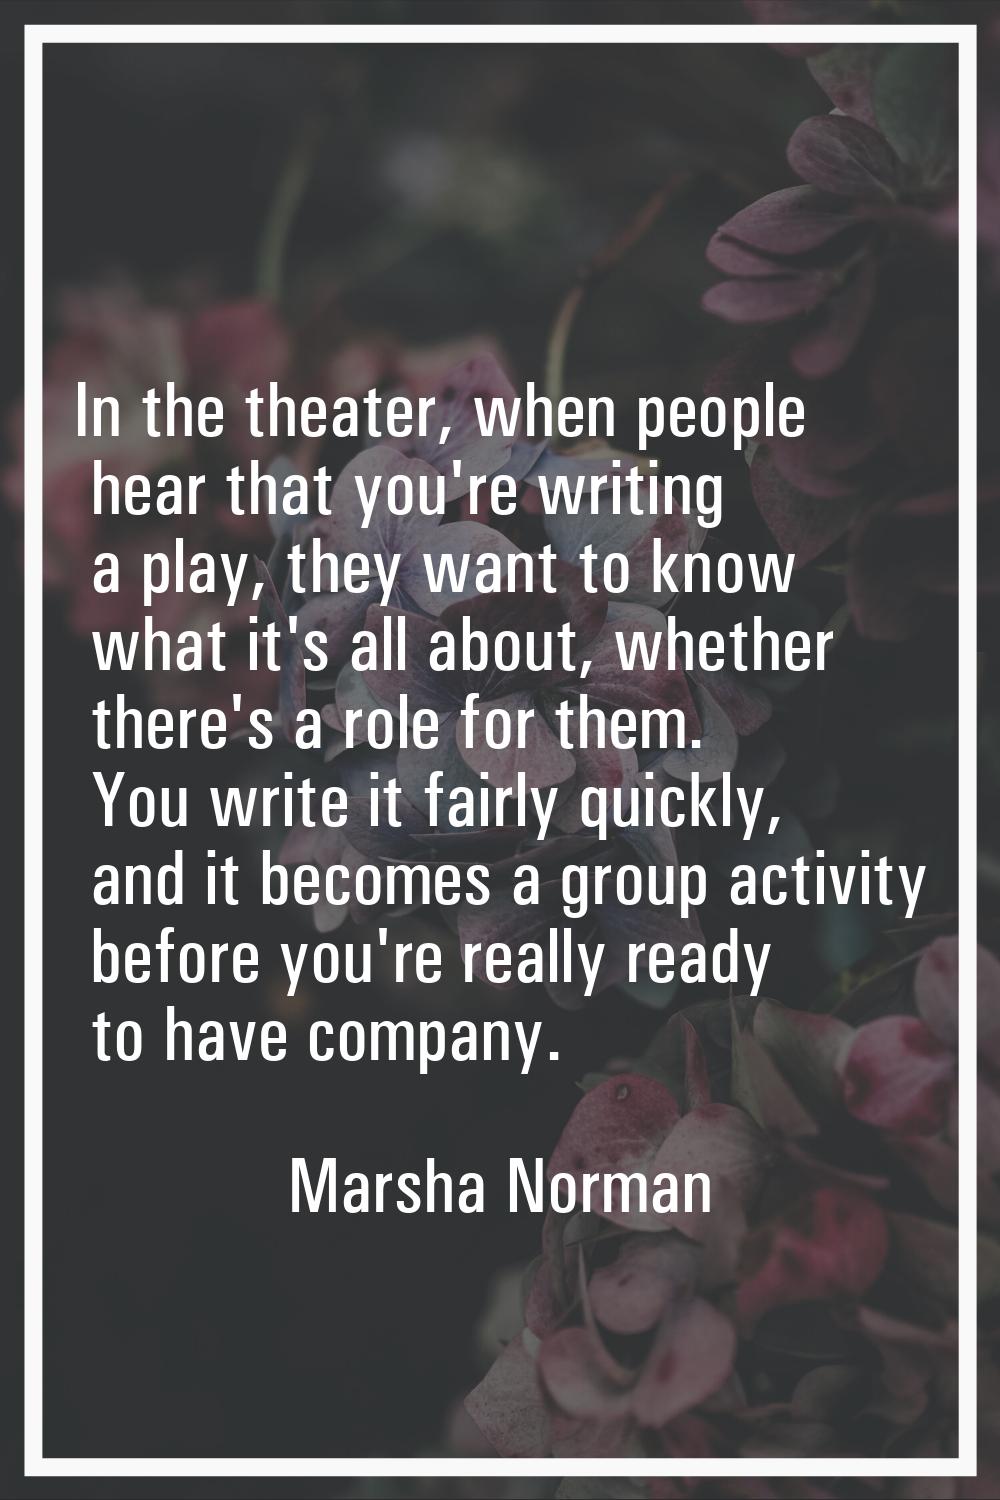 In the theater, when people hear that you're writing a play, they want to know what it's all about,